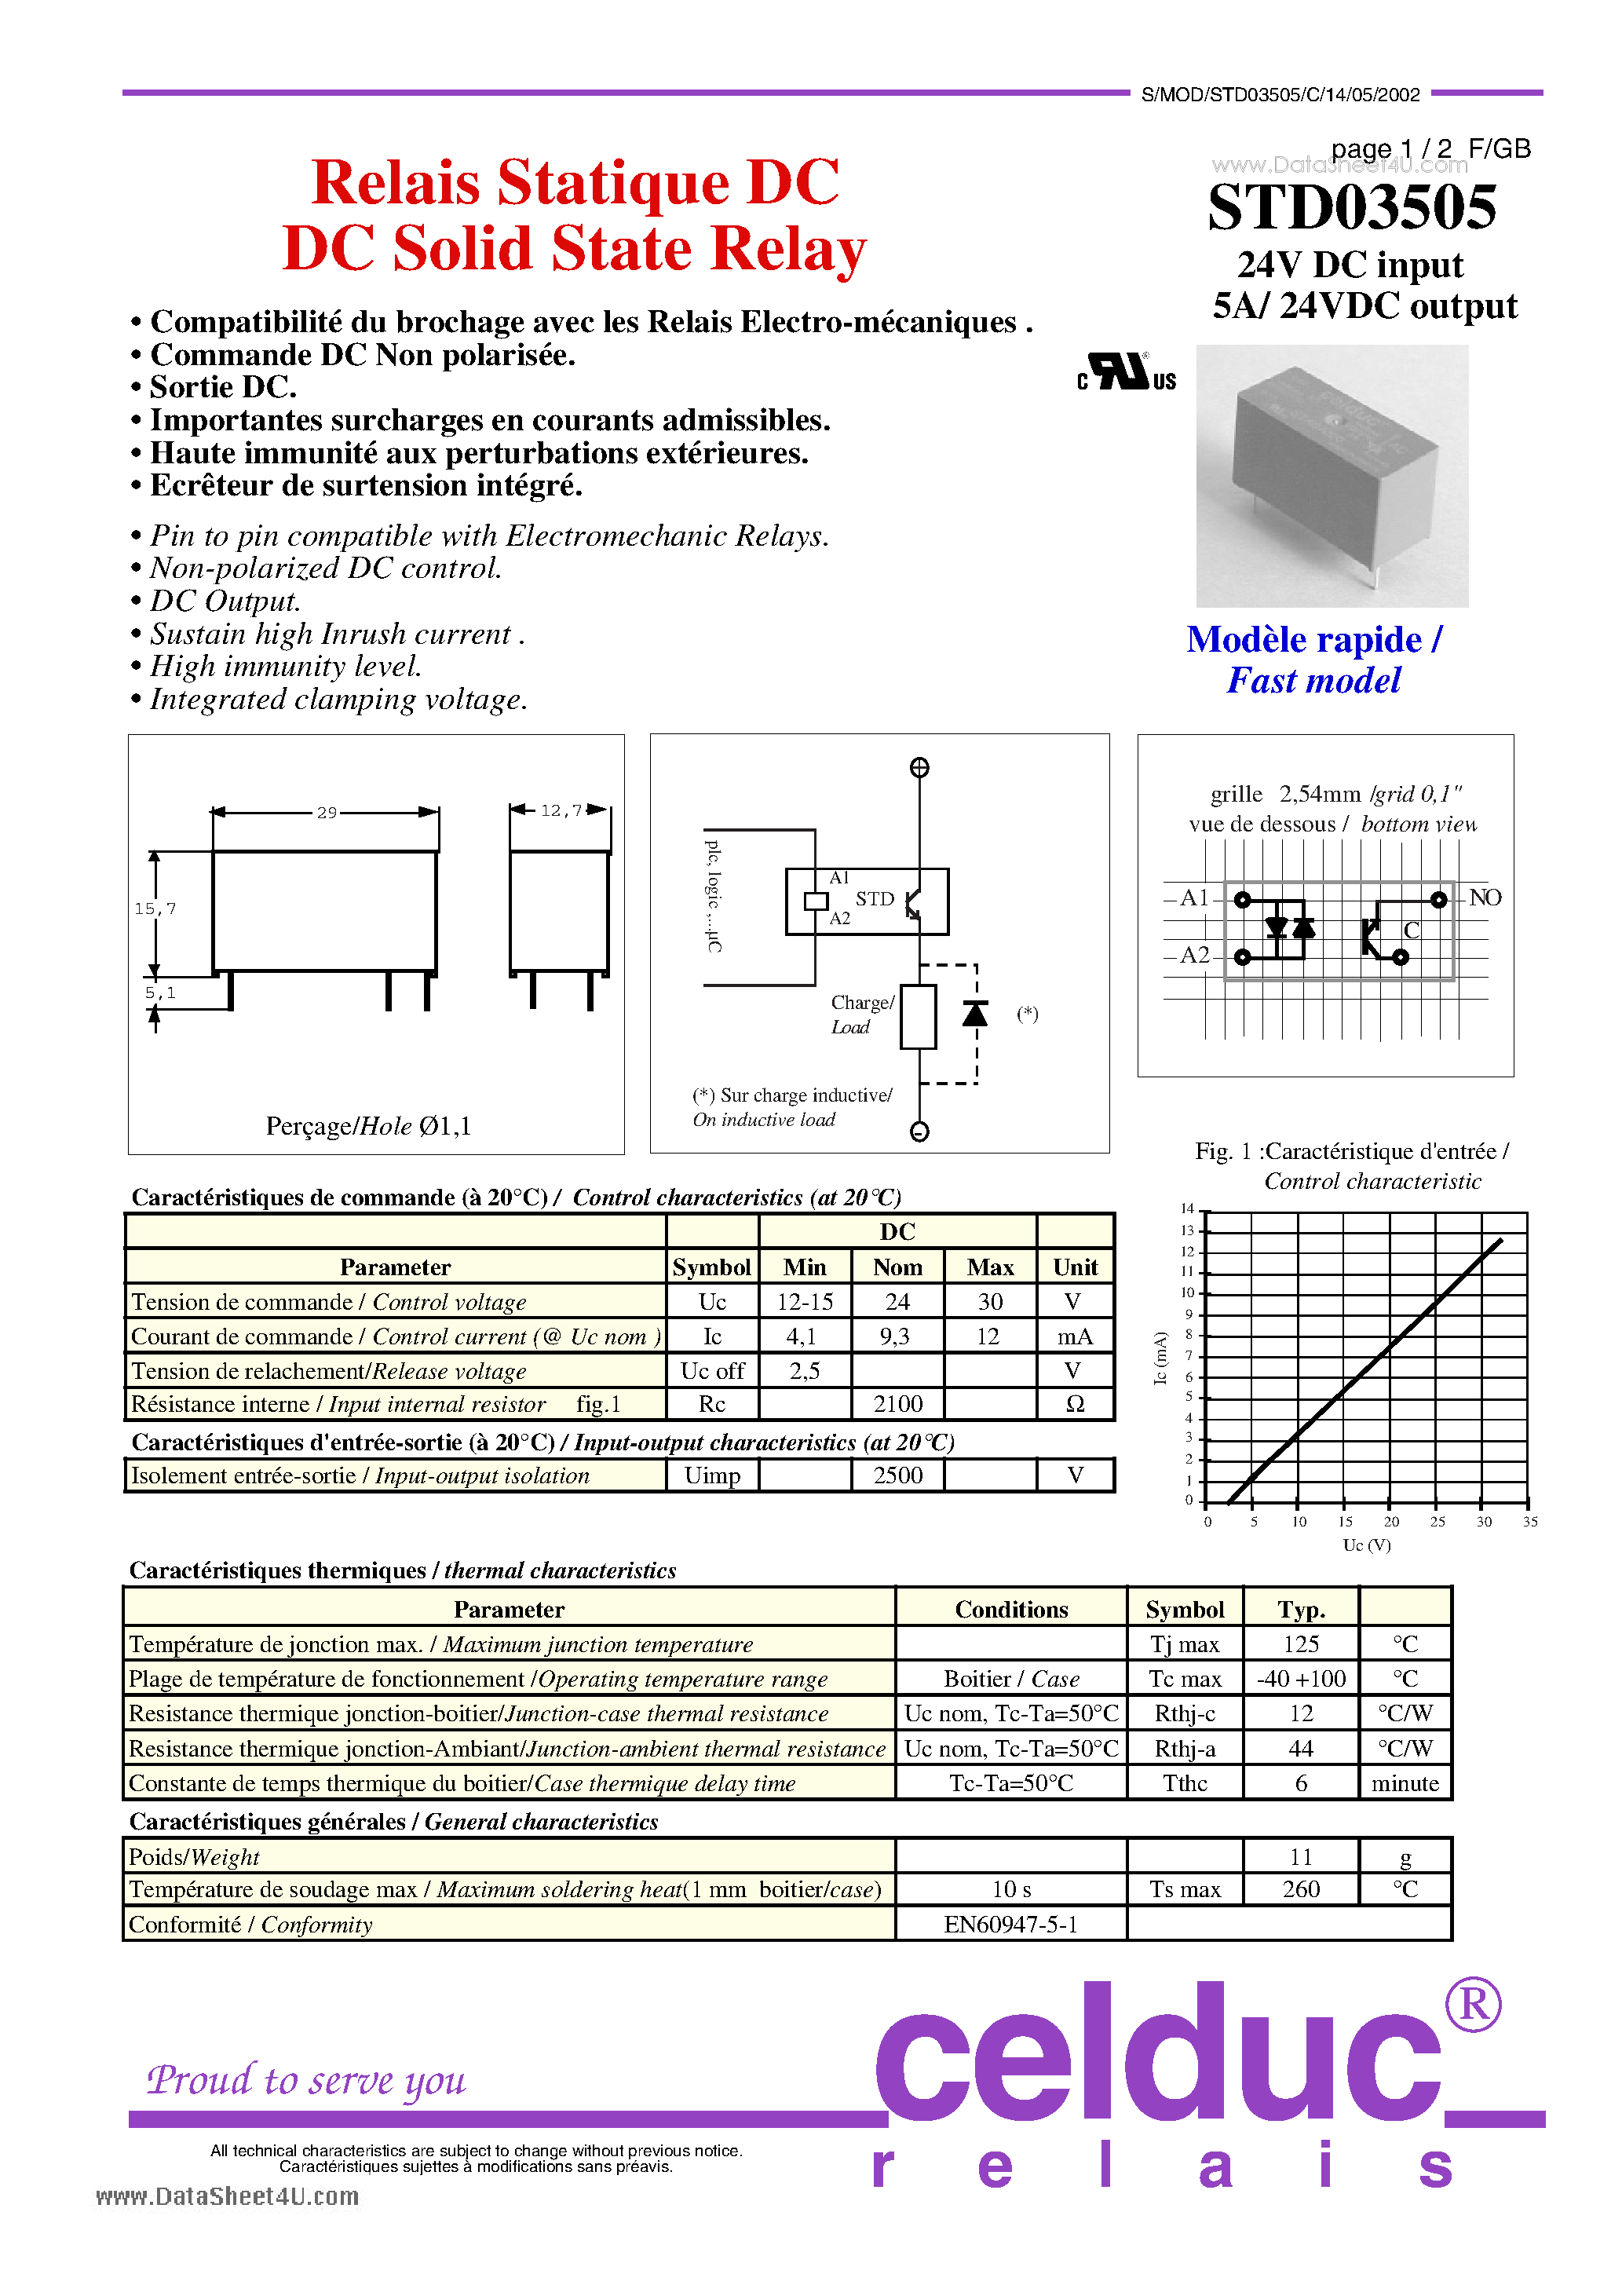 Datasheet STD03505 - DC Solid State Relay page 1